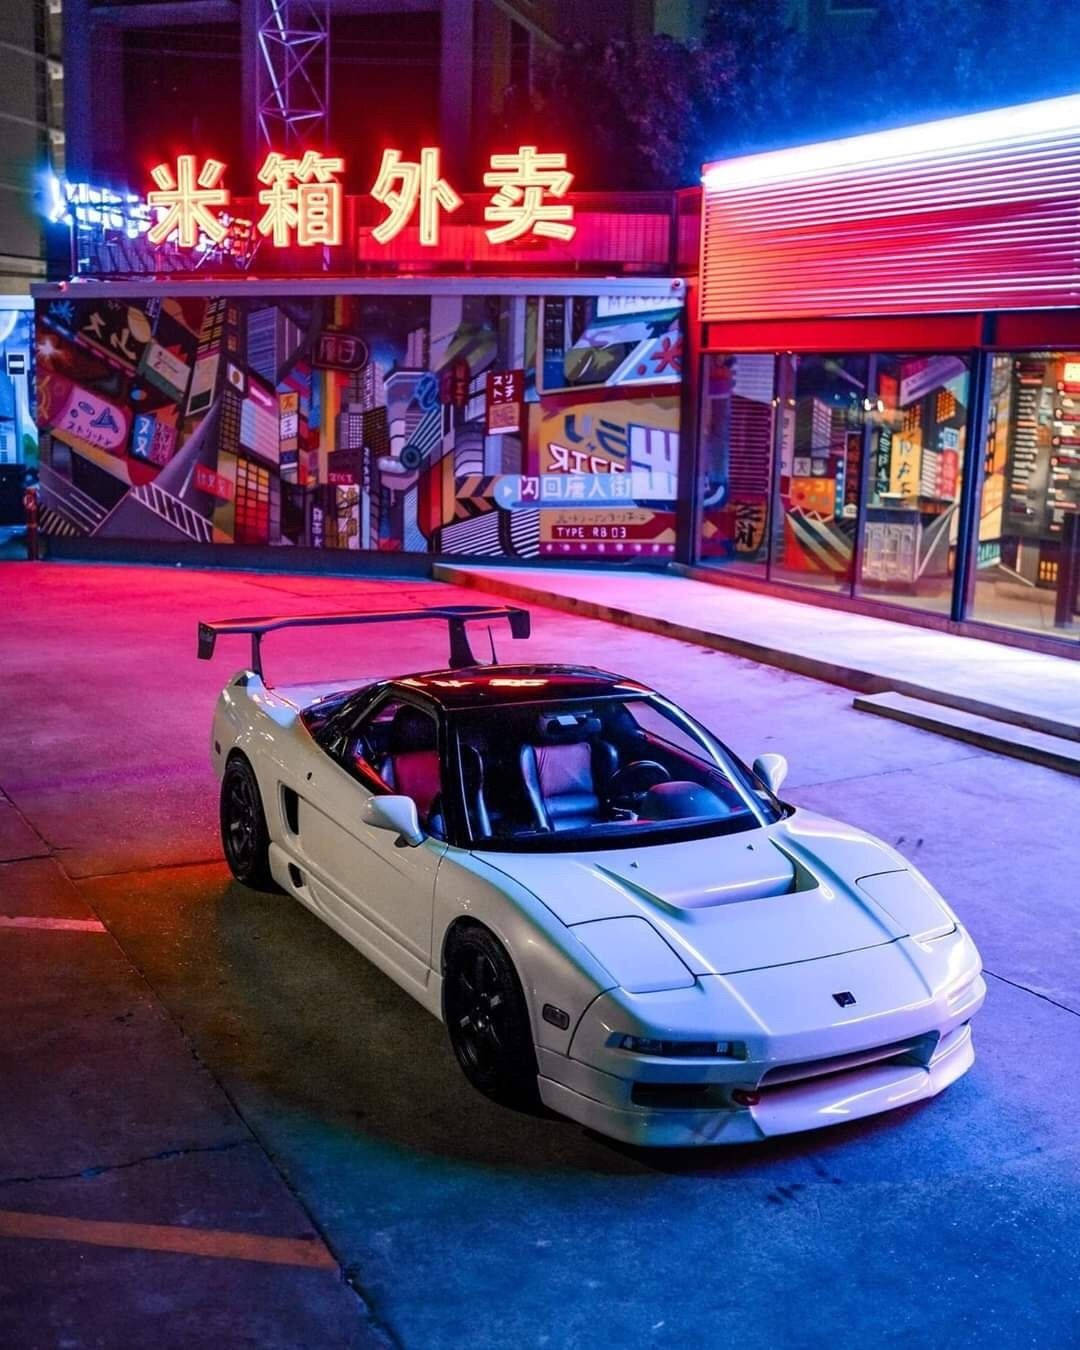 Jdm Car Surrounded By Neon Lights Wallpaper